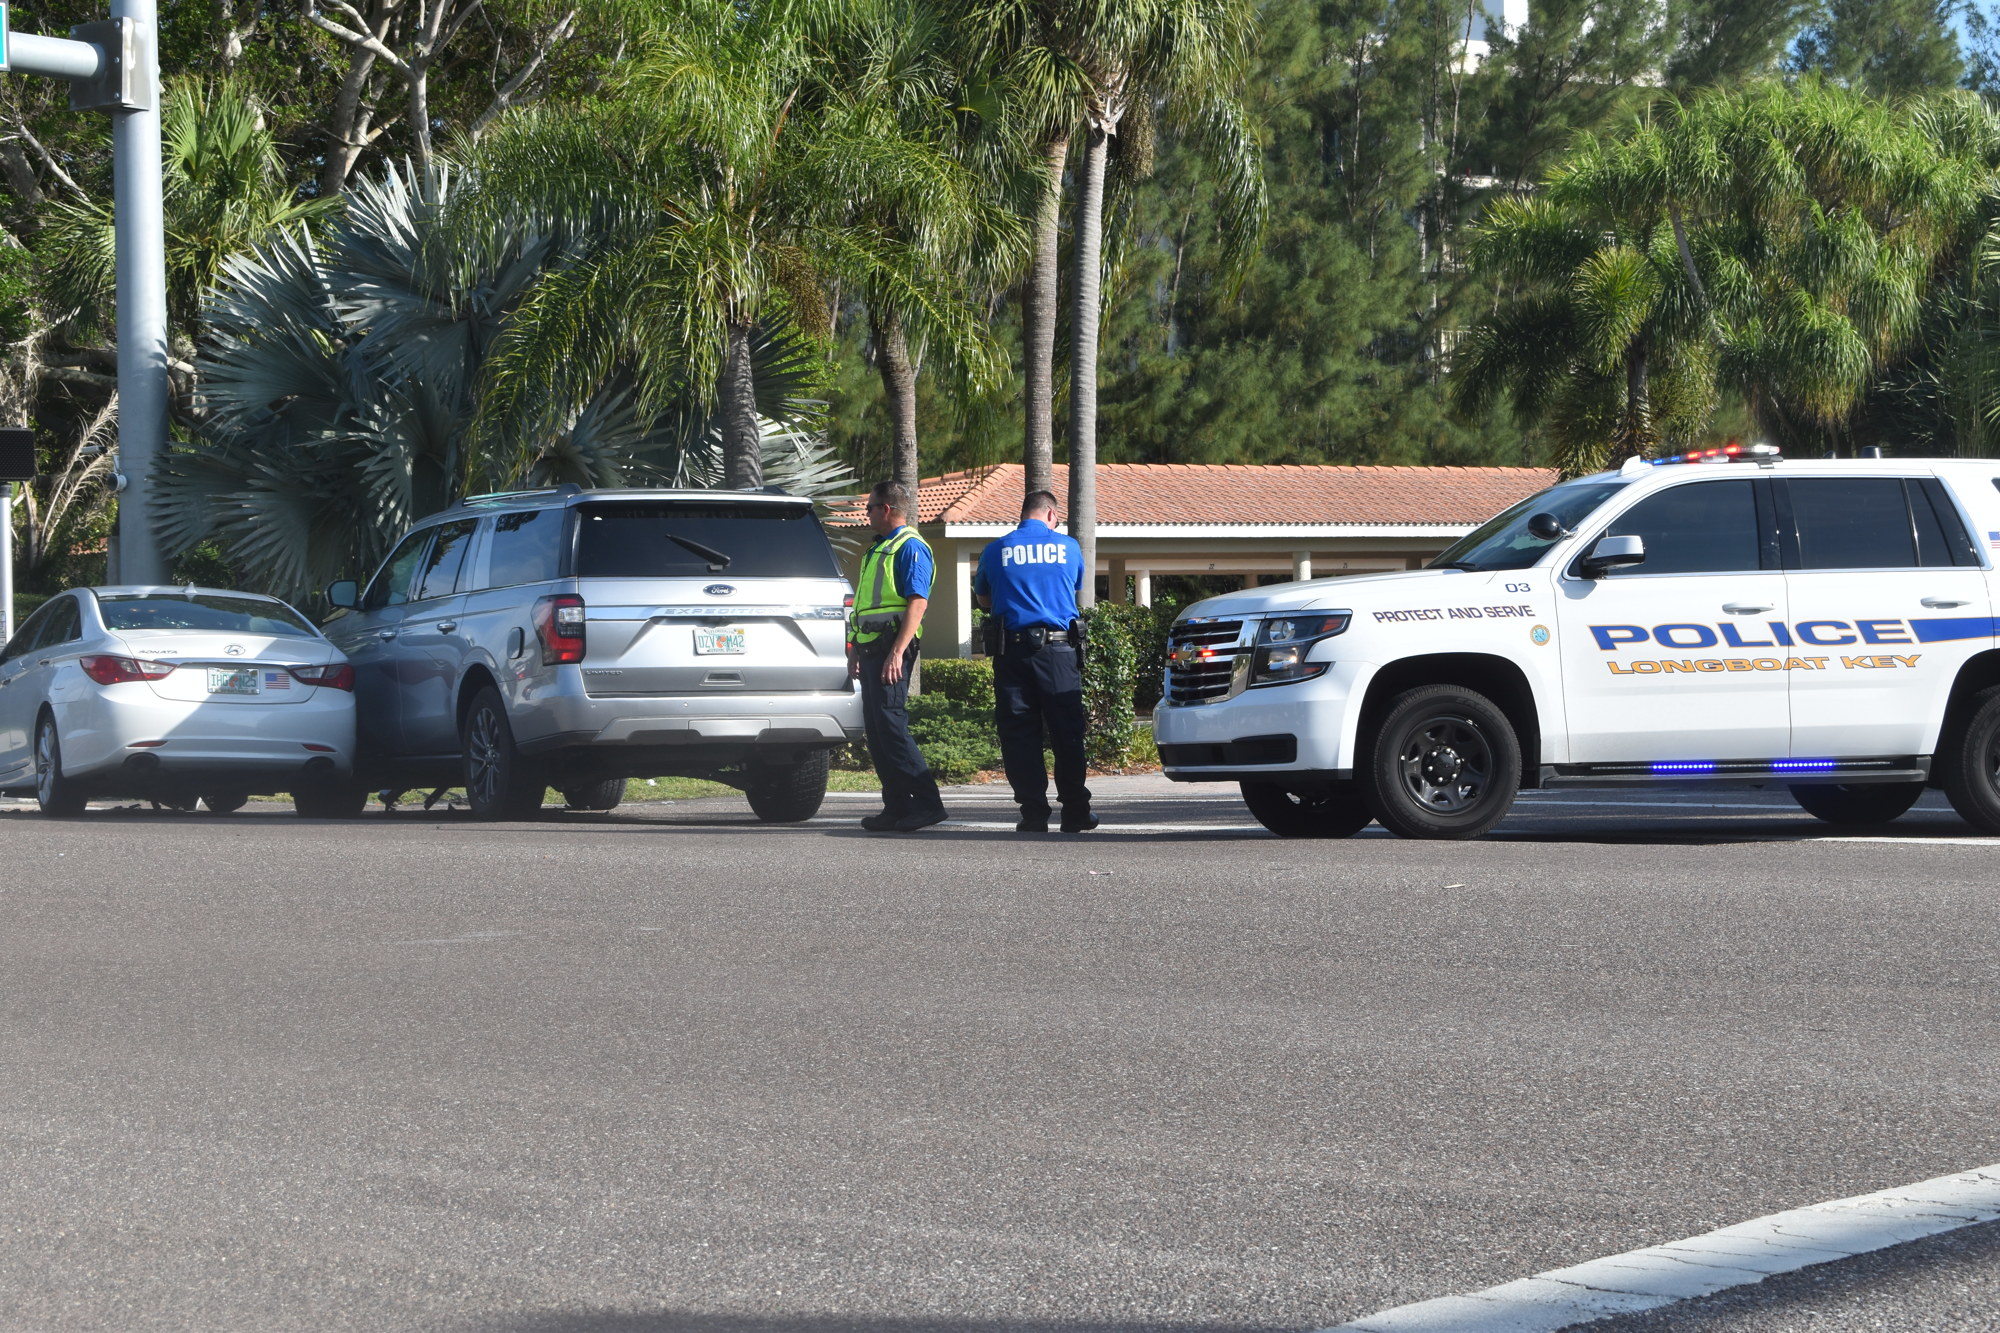 Longboat Key police helped direct traffic on Gulf of Mexico Drive near Bay Isles Parkway.